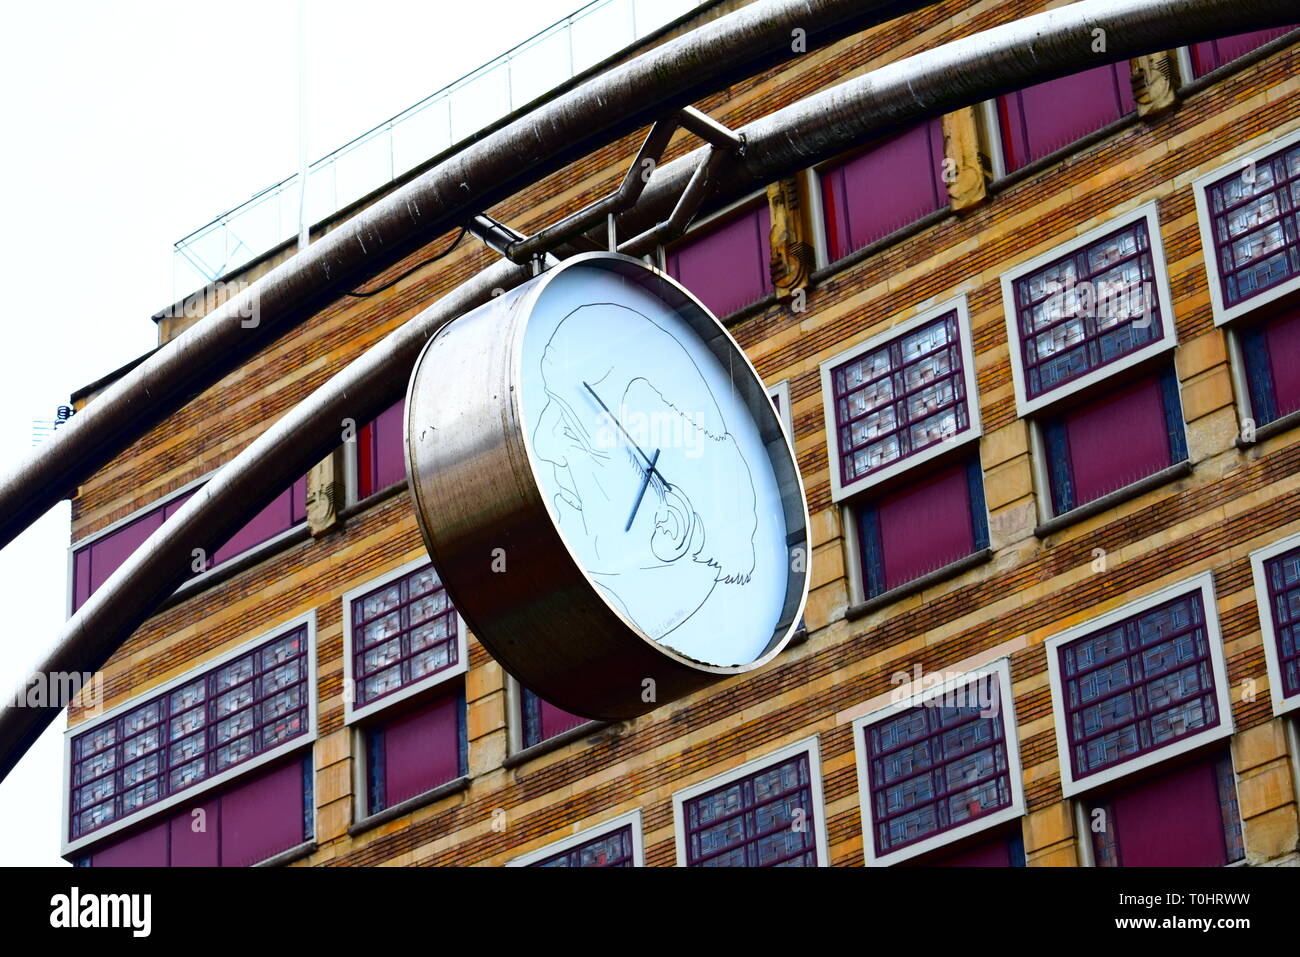 haarlem , netherlands - clock with drawing and purple building background. Stock Photo